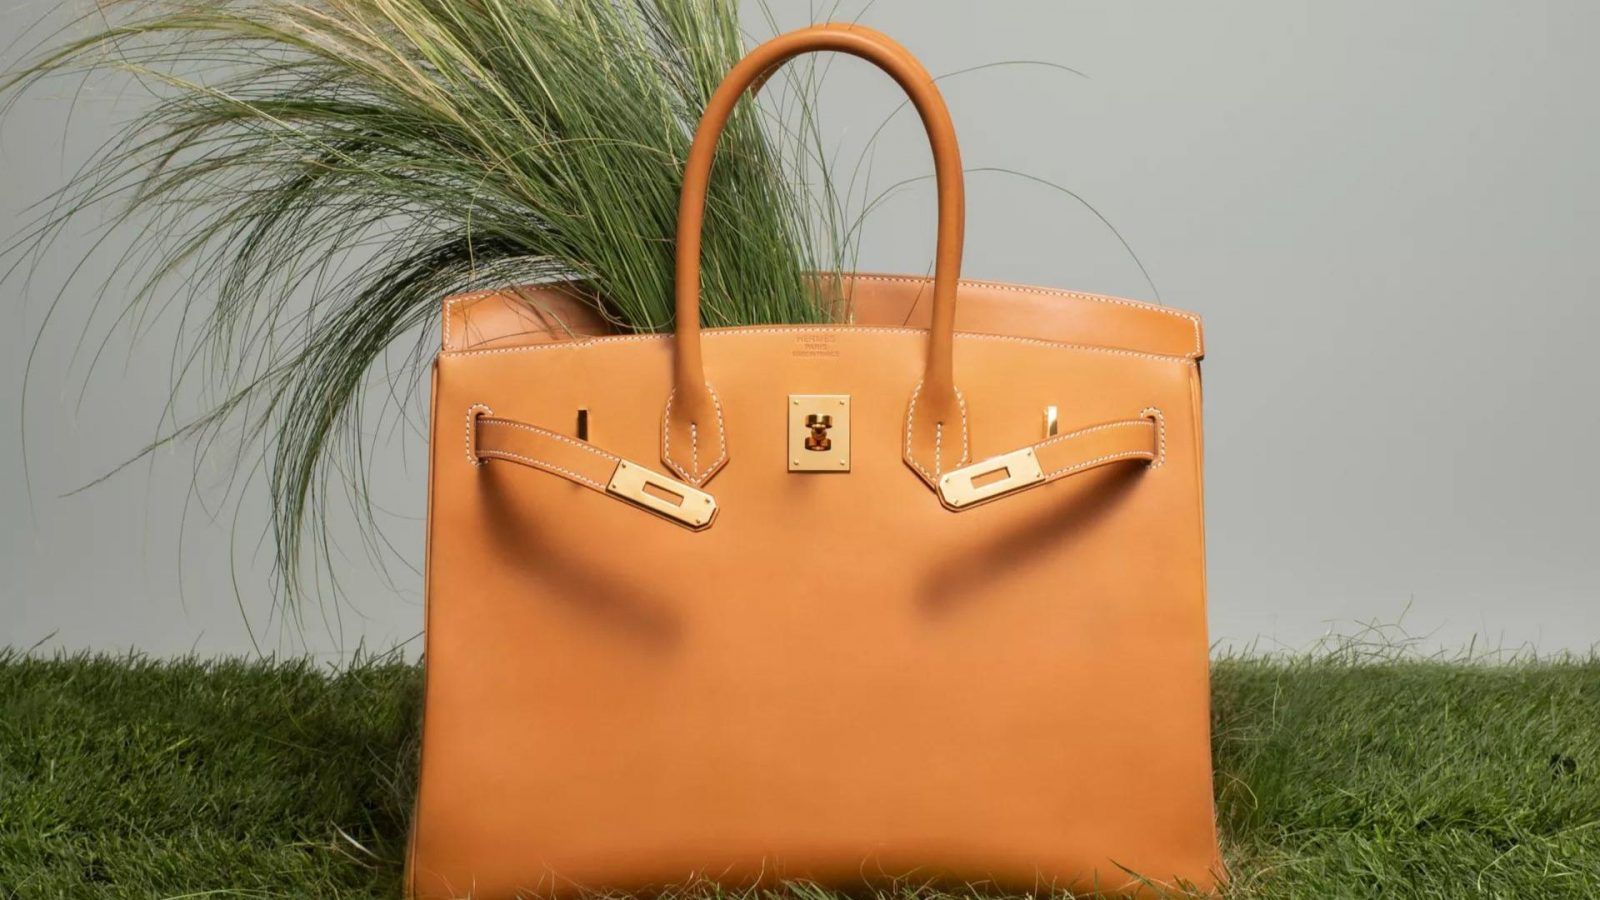 6 Most Expensive Hermès Handbags As Of 2023 - Journey To France